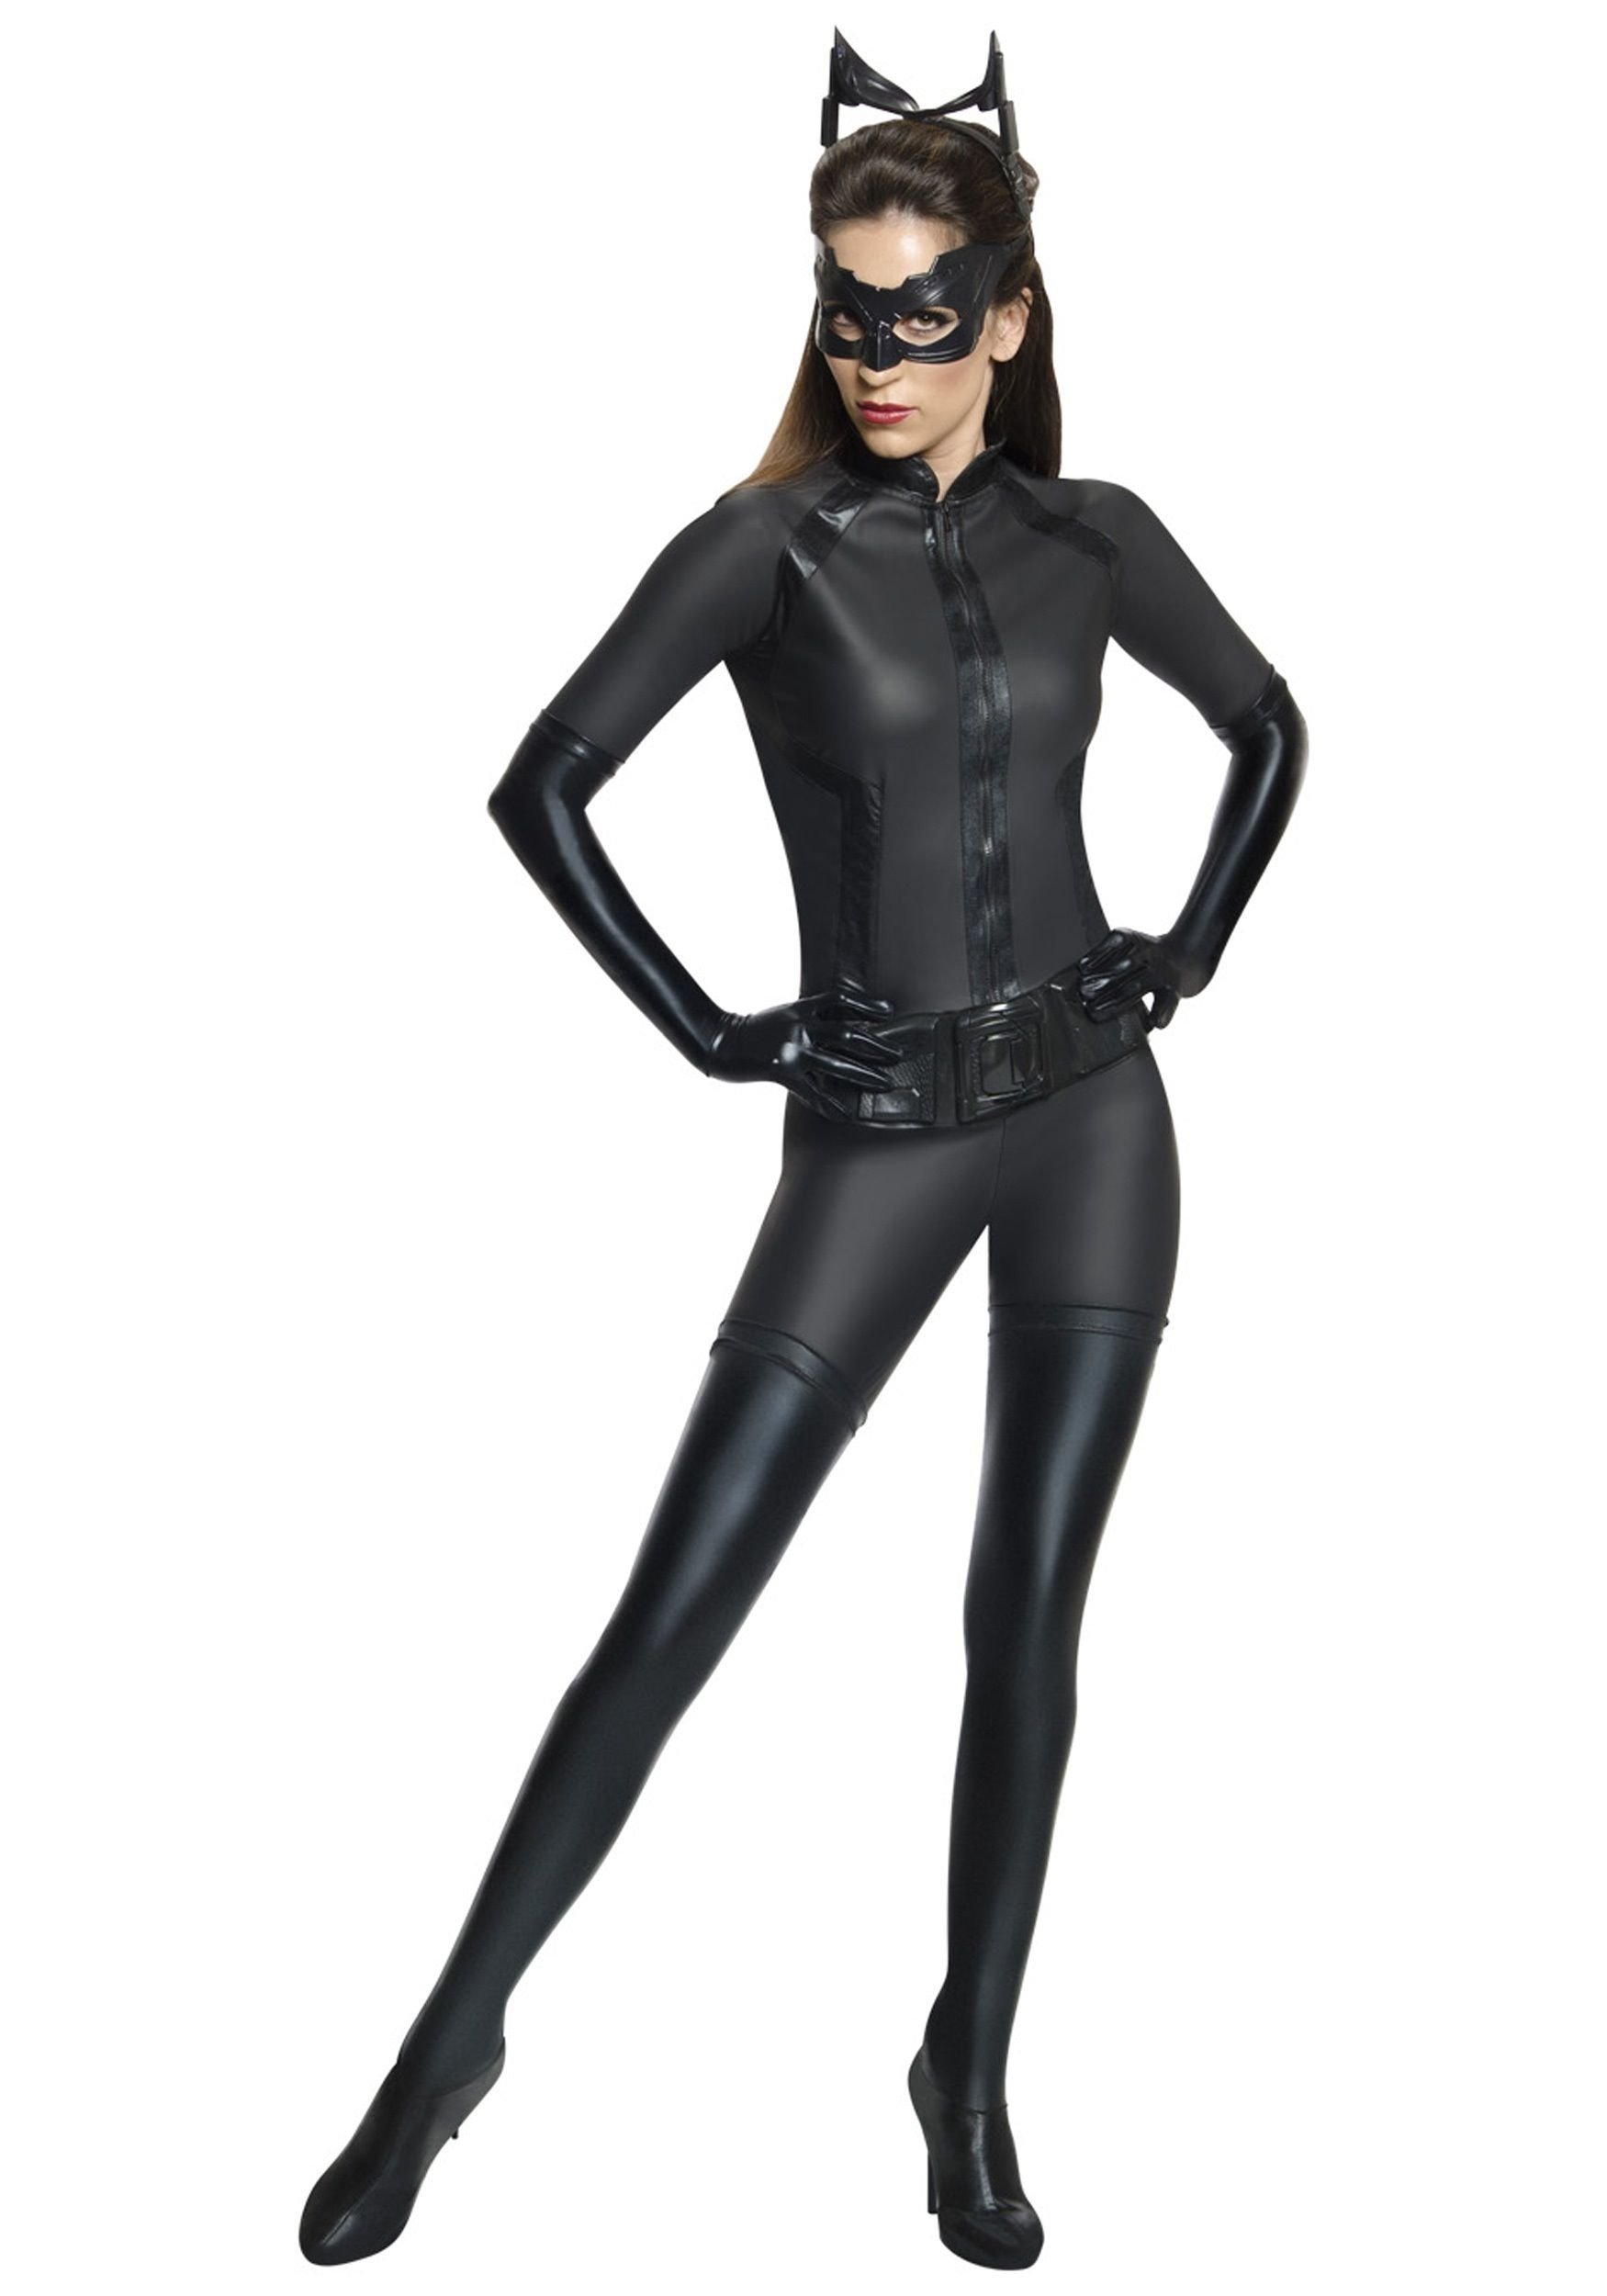 10 Wonderful Good Ideas For Halloween Costumes catwoman adult halloween costume oh this is a good 1 too ideas for 2022